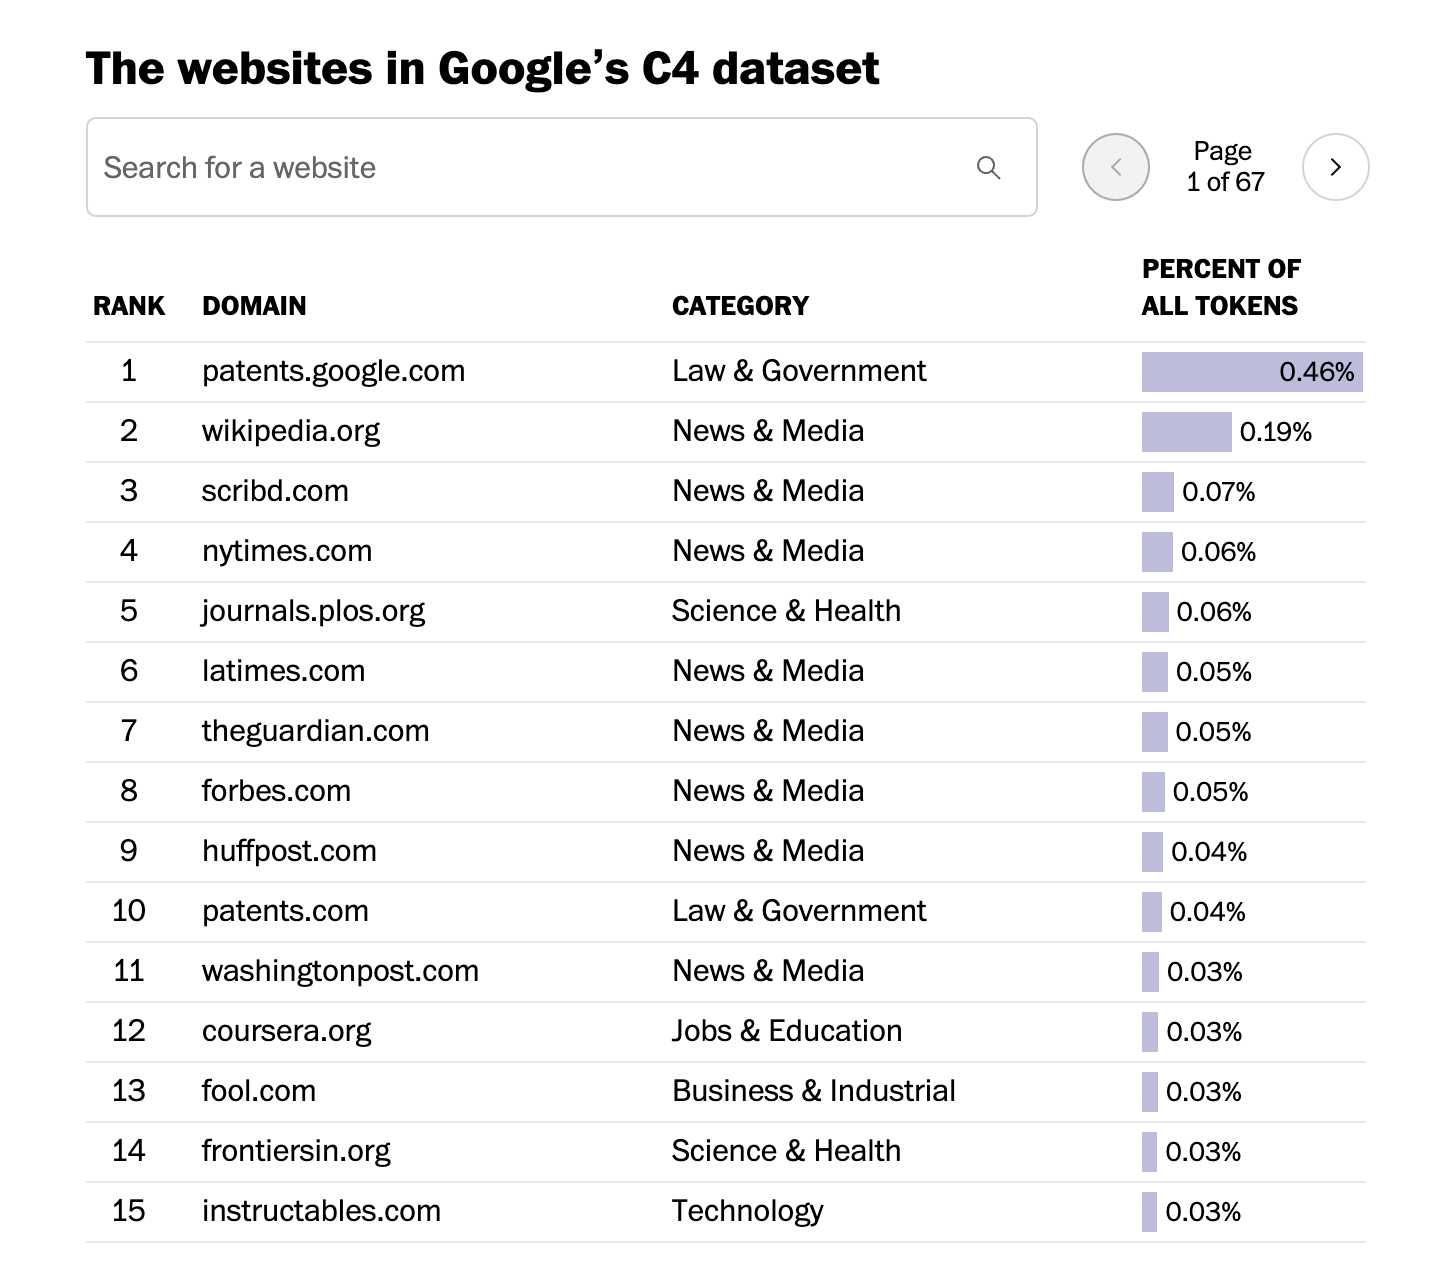 table - the websites used to train the Google C4 dataset. google's patent database is at the top, then mainly news sites